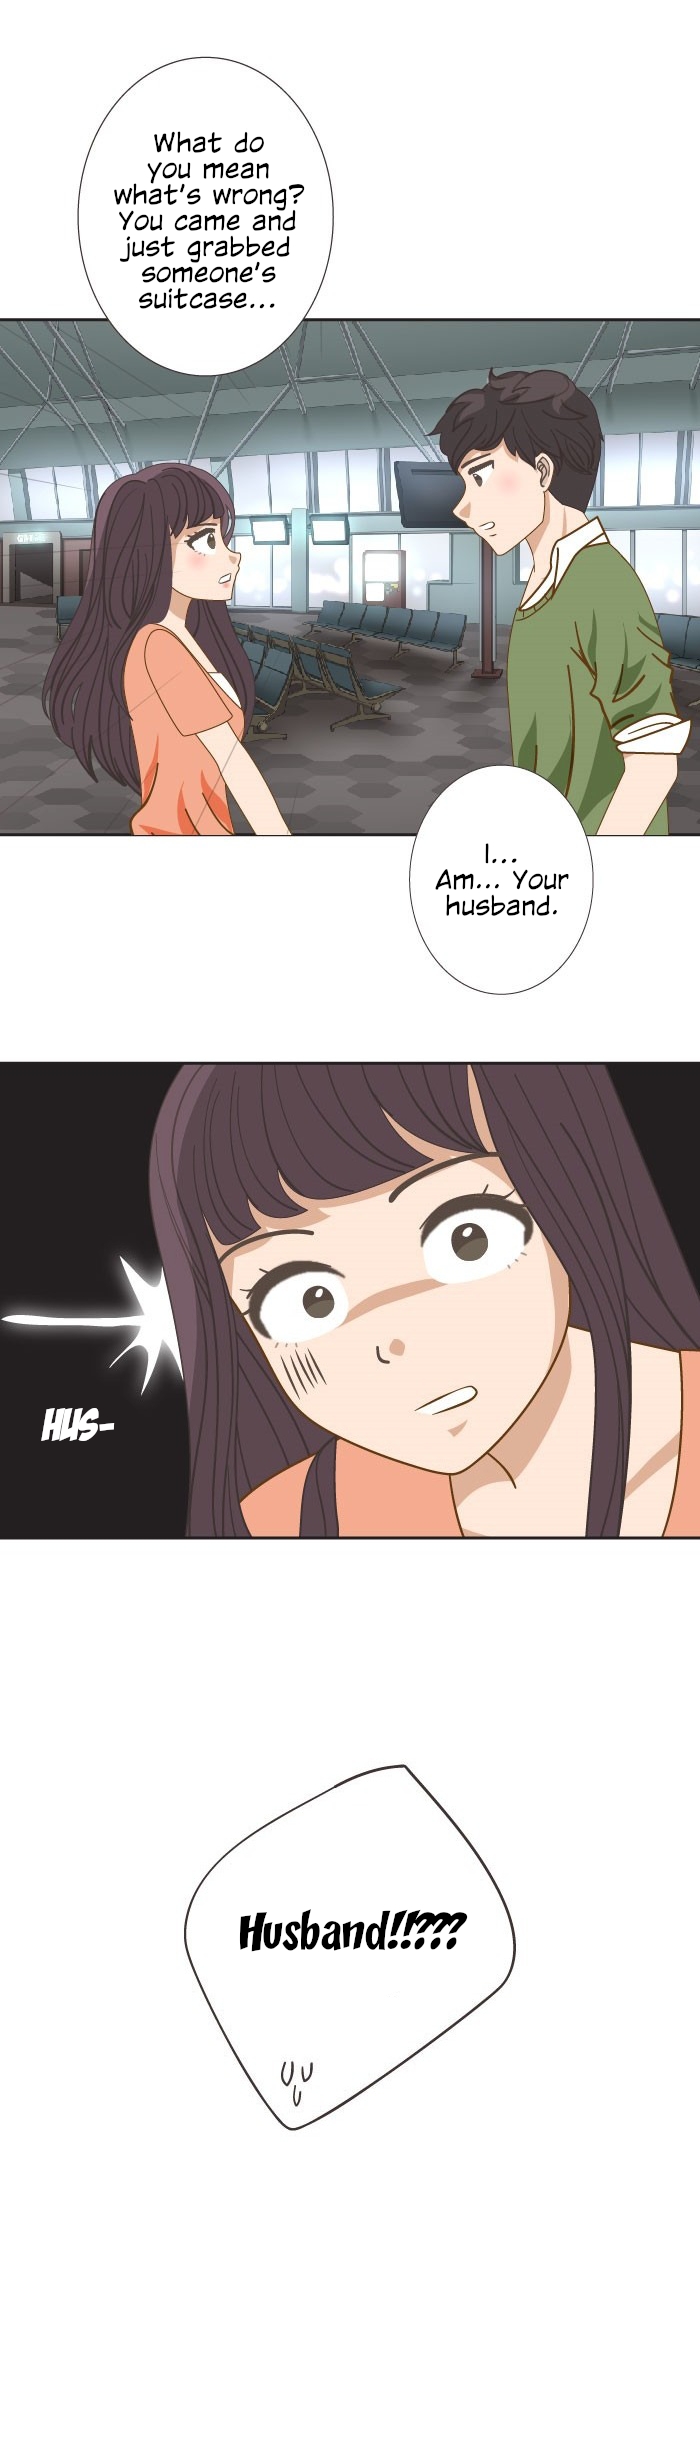 iMarried Ch. 3